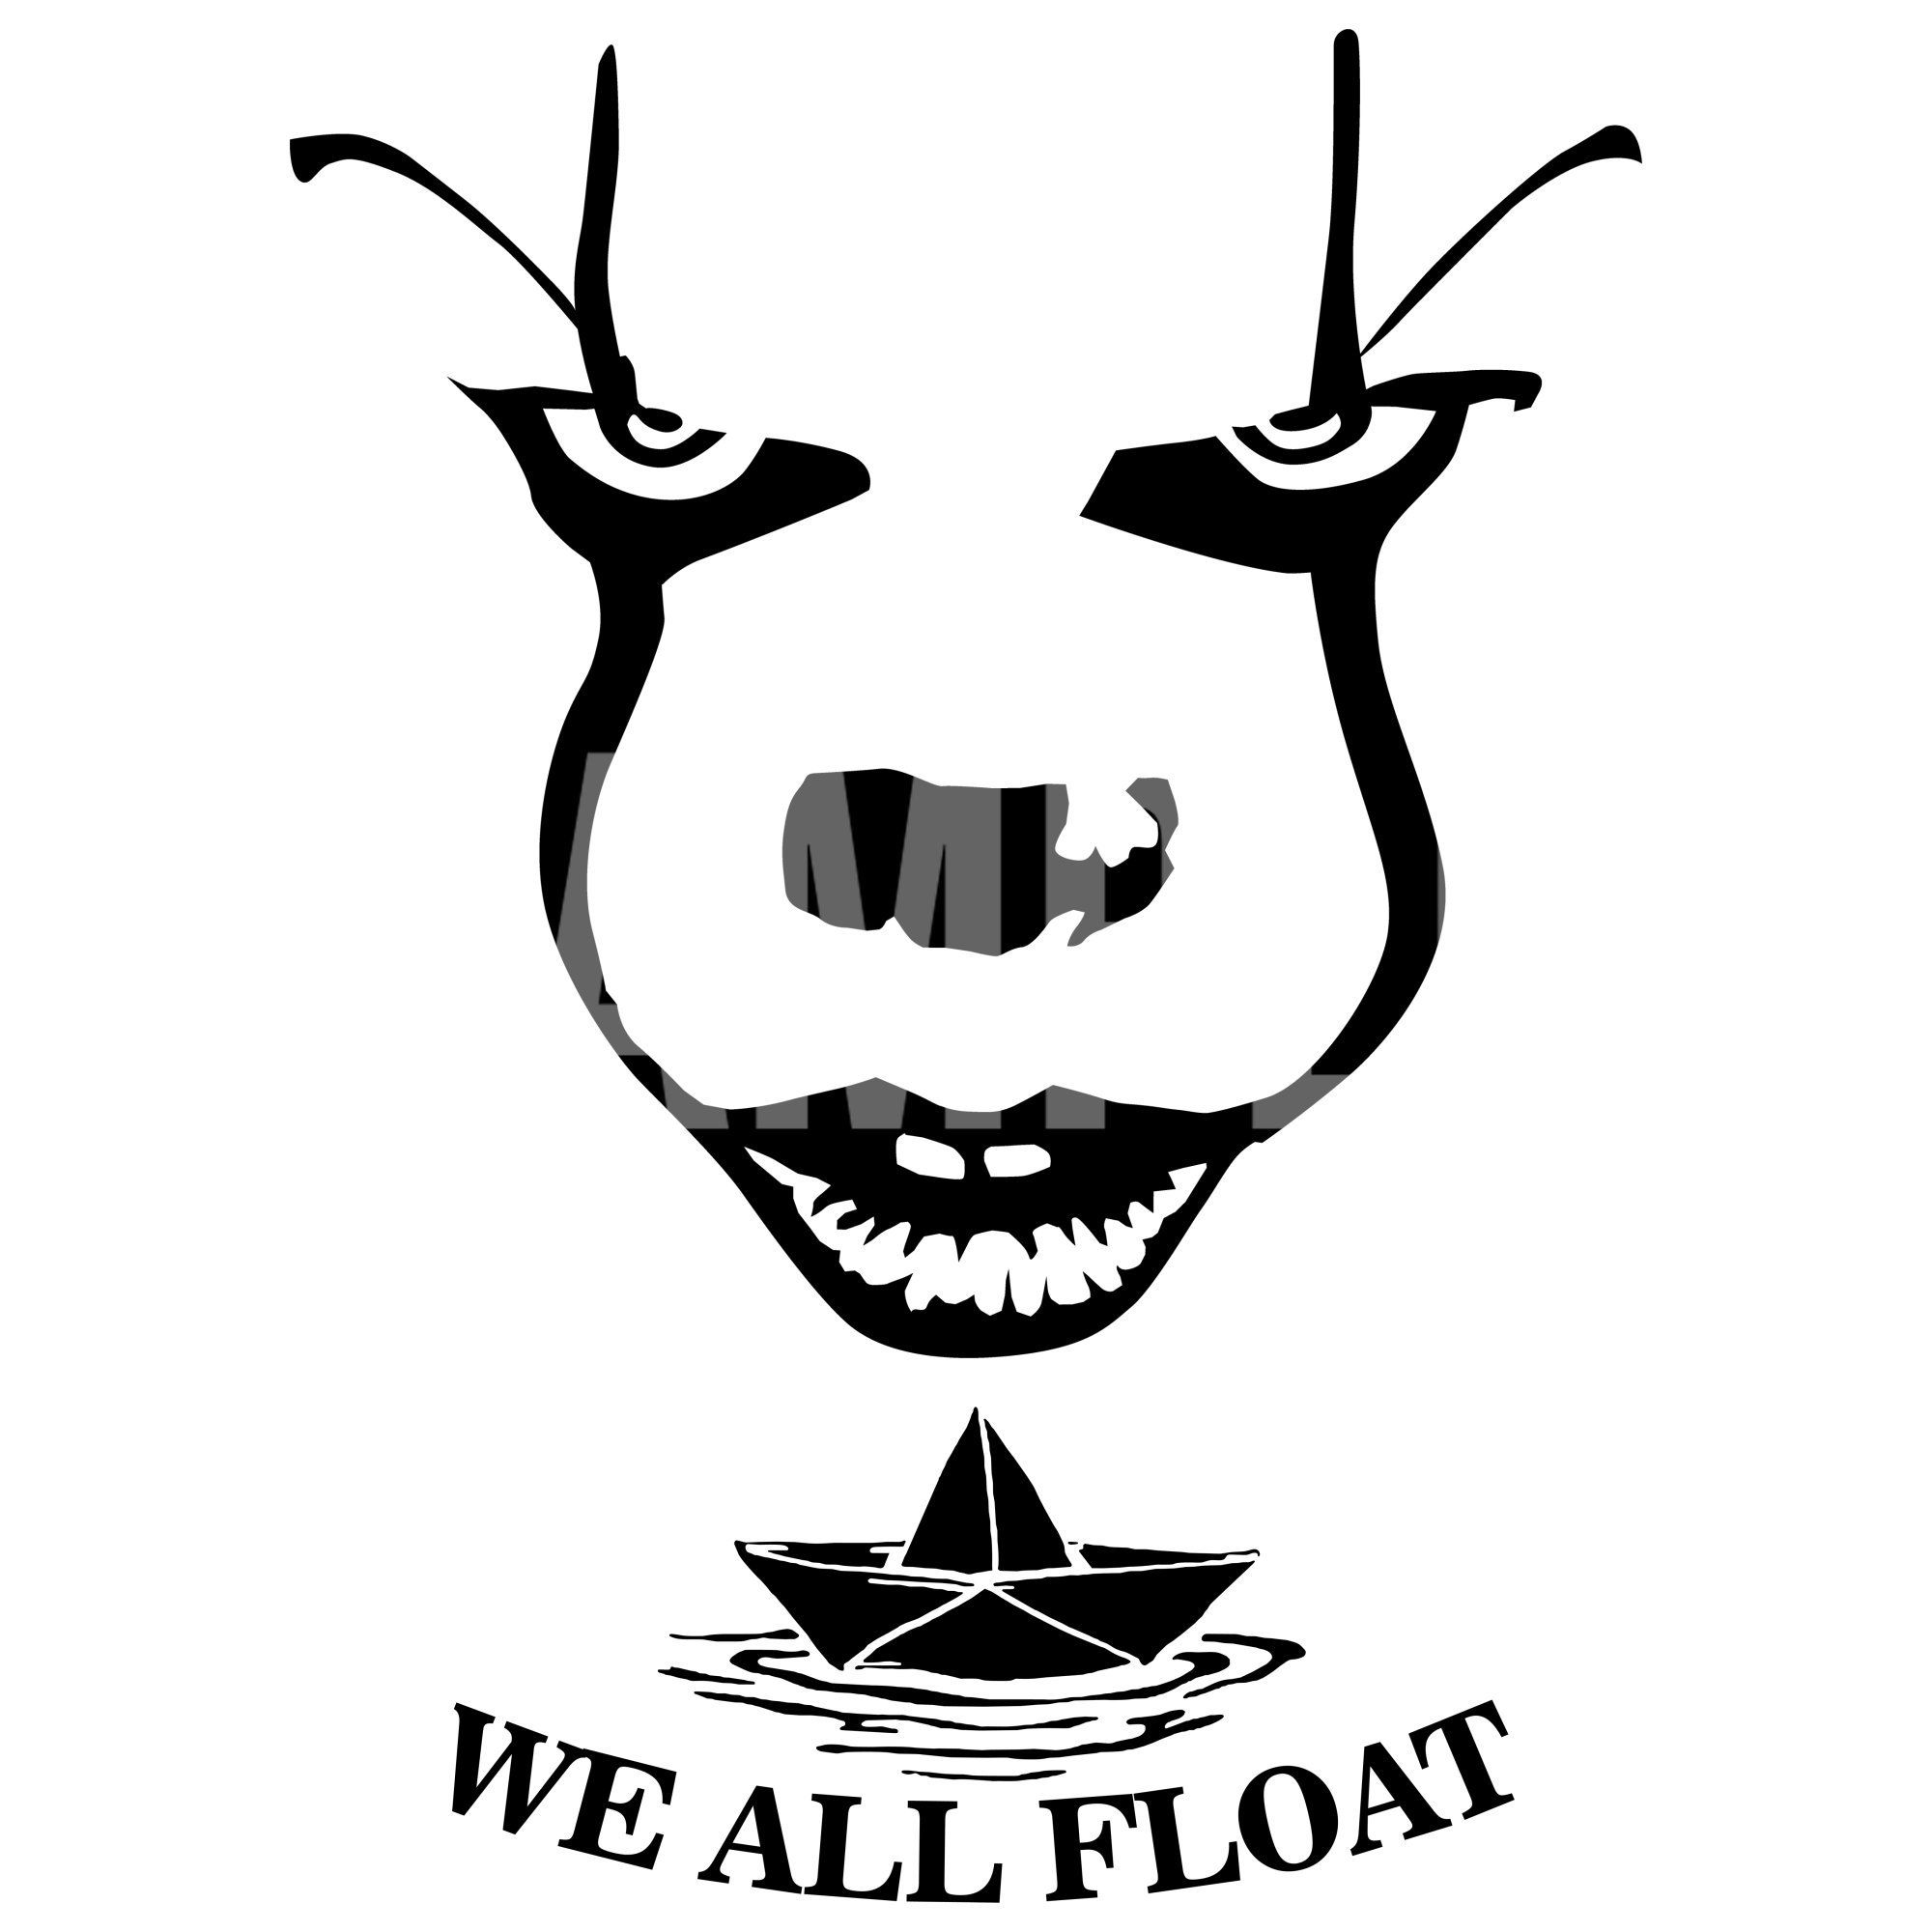 Pennywise all float.